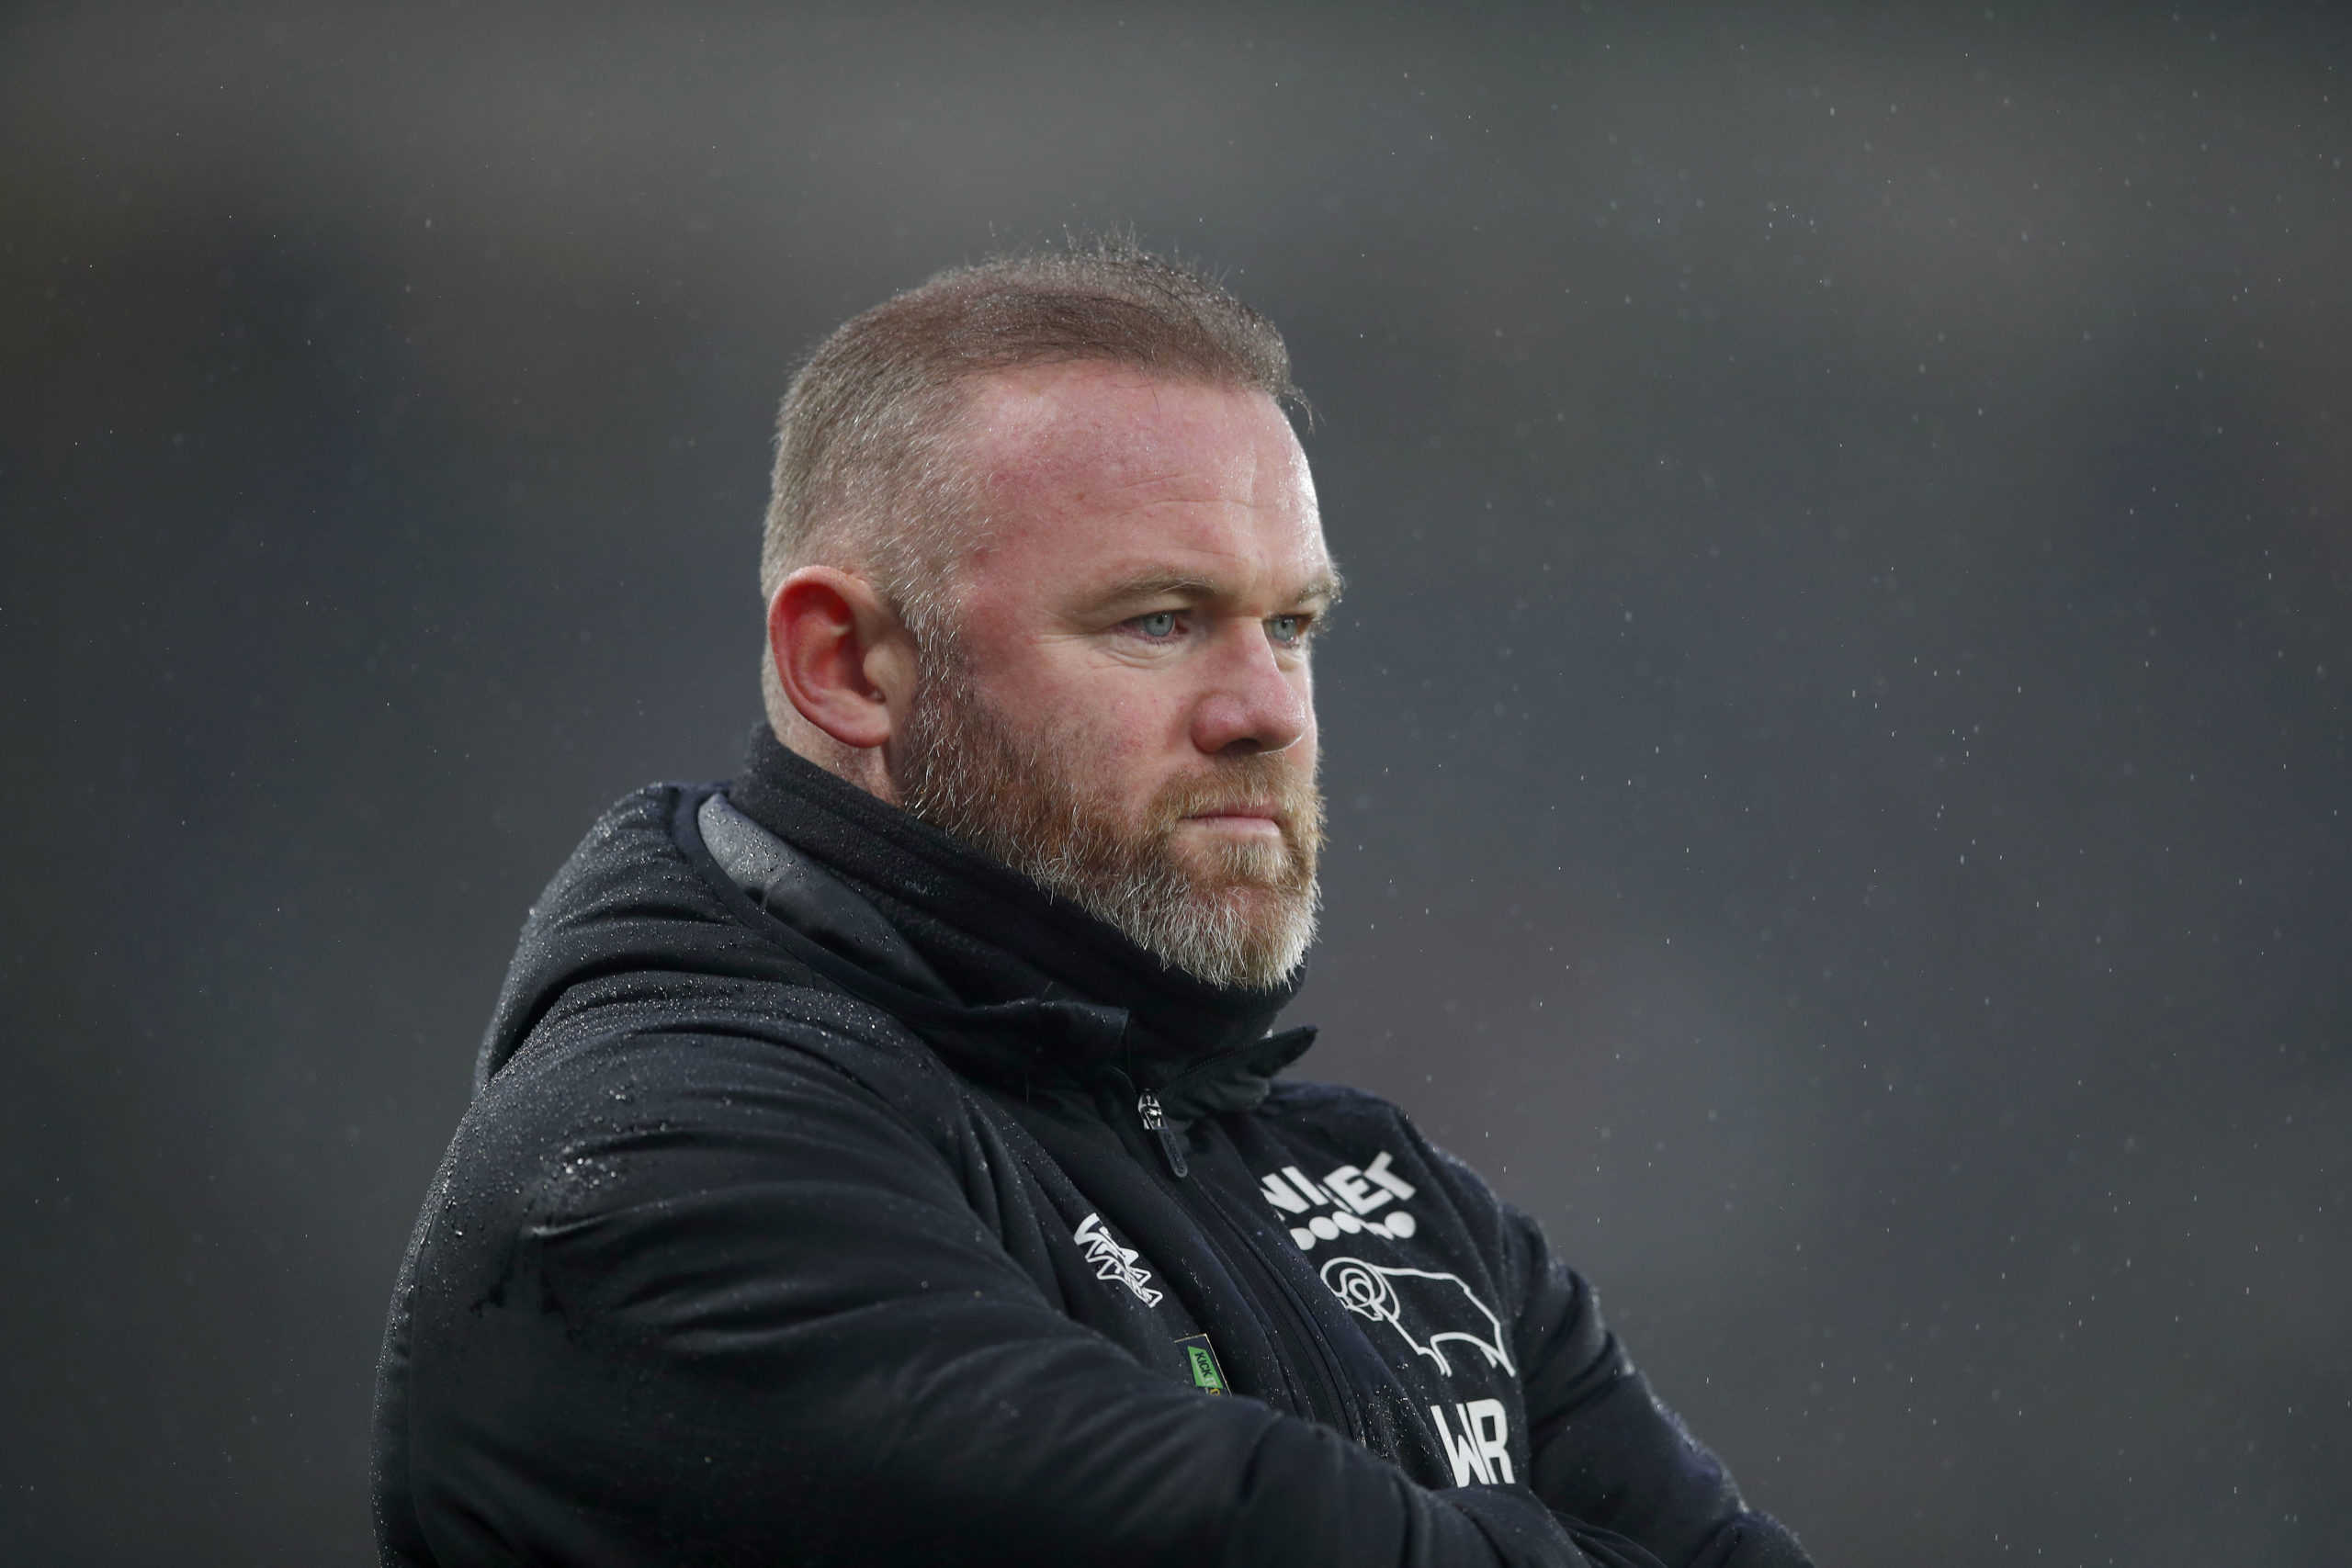 Derby County v West Bromwich Albion - Sky Bet Championship